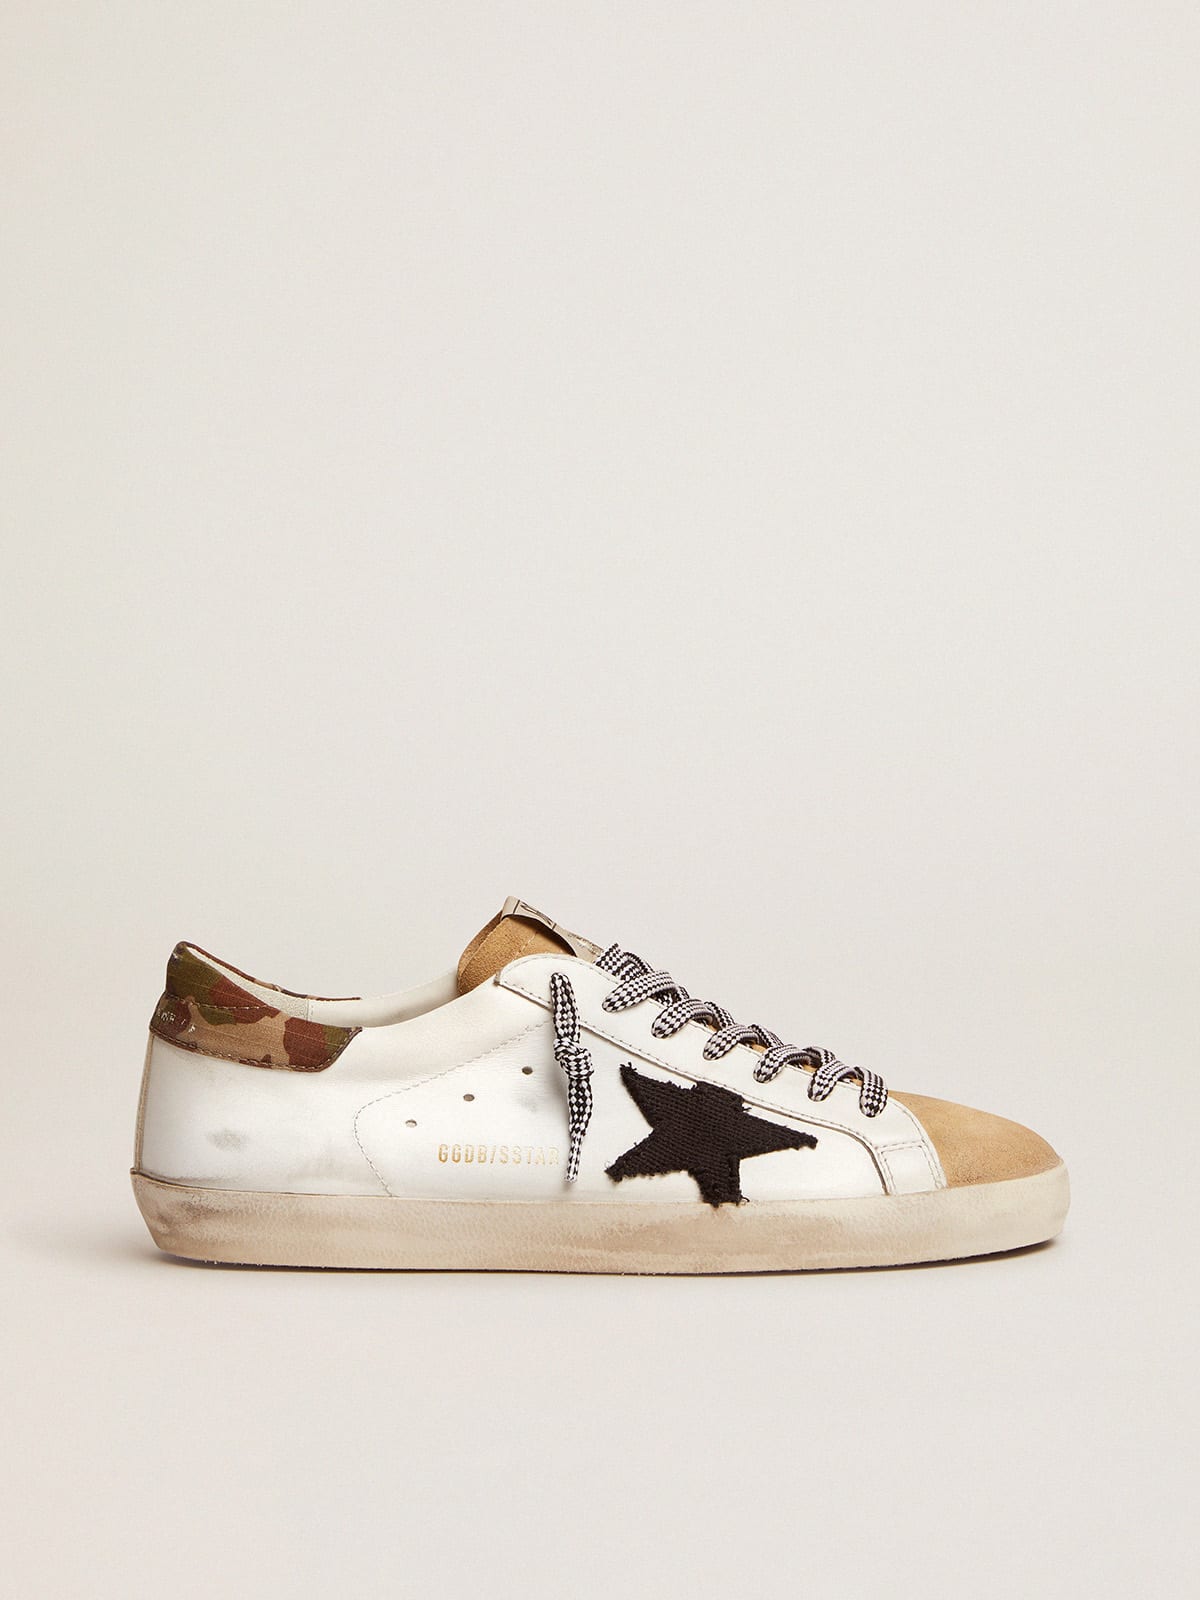 Super-Star LTD sneakers in white leather with camouflage heel tab and black  star